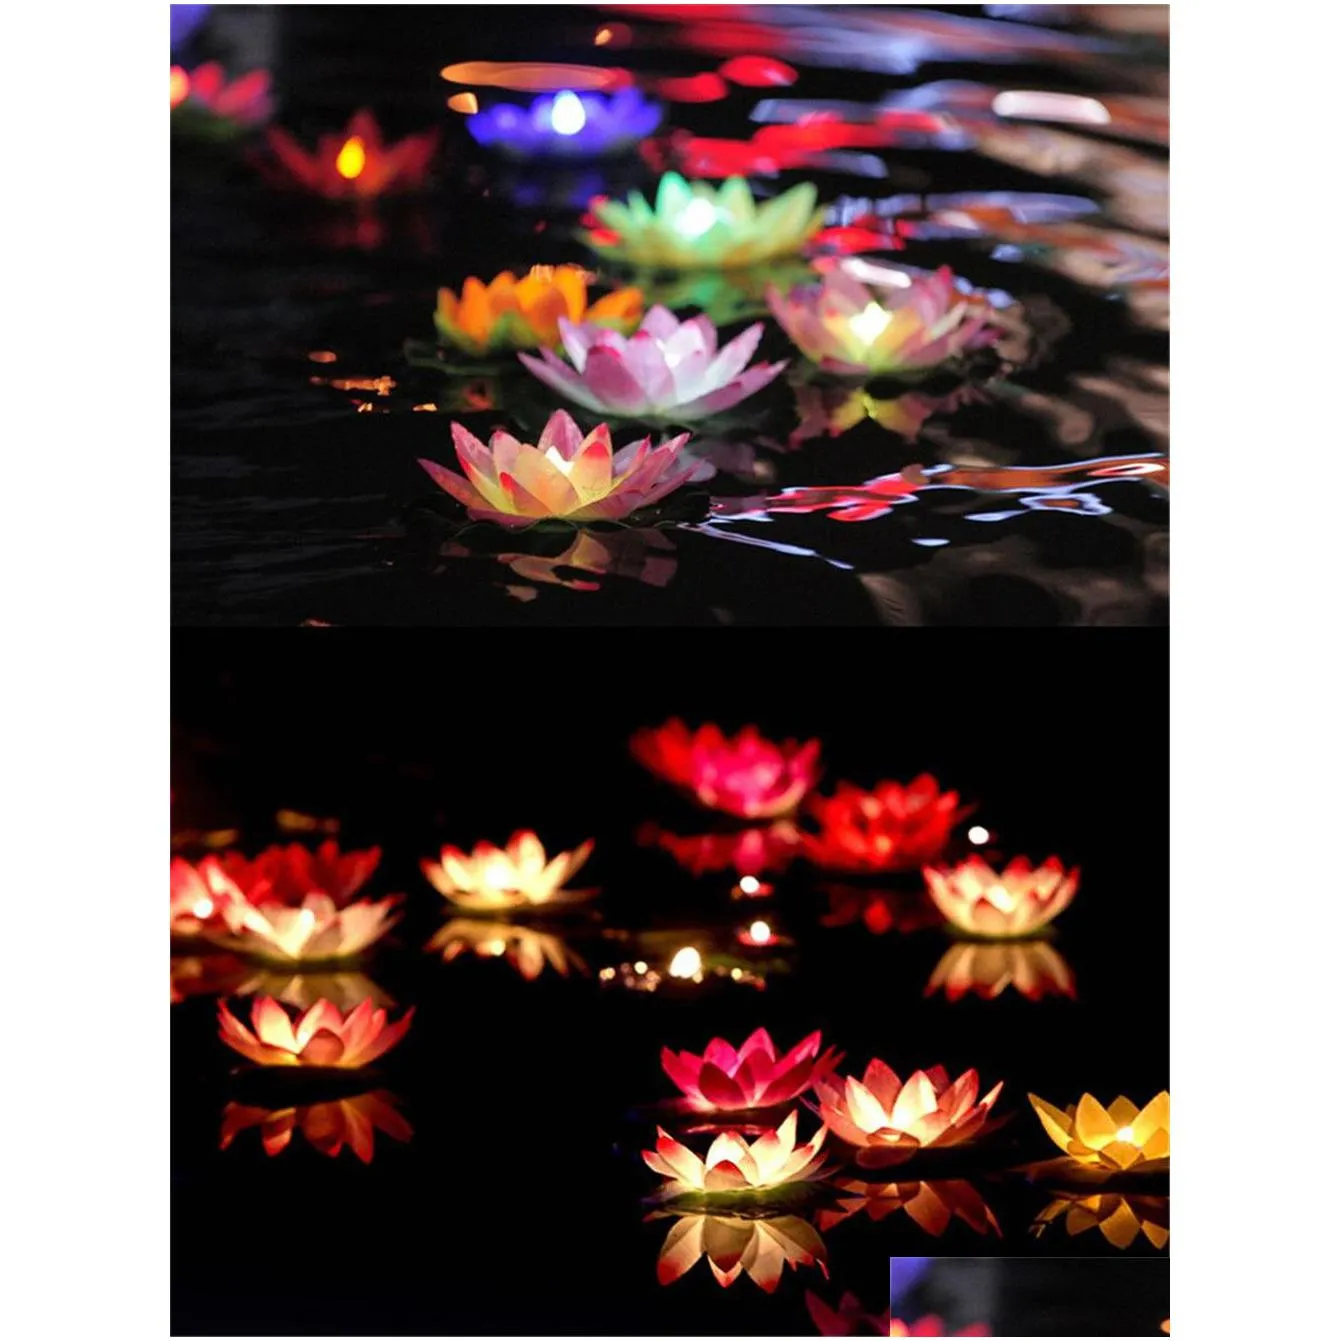 festive diameter 18 cm led lotus lamp in colorful changed floating water pool wishing light lamps lanterns for party decoration xb1